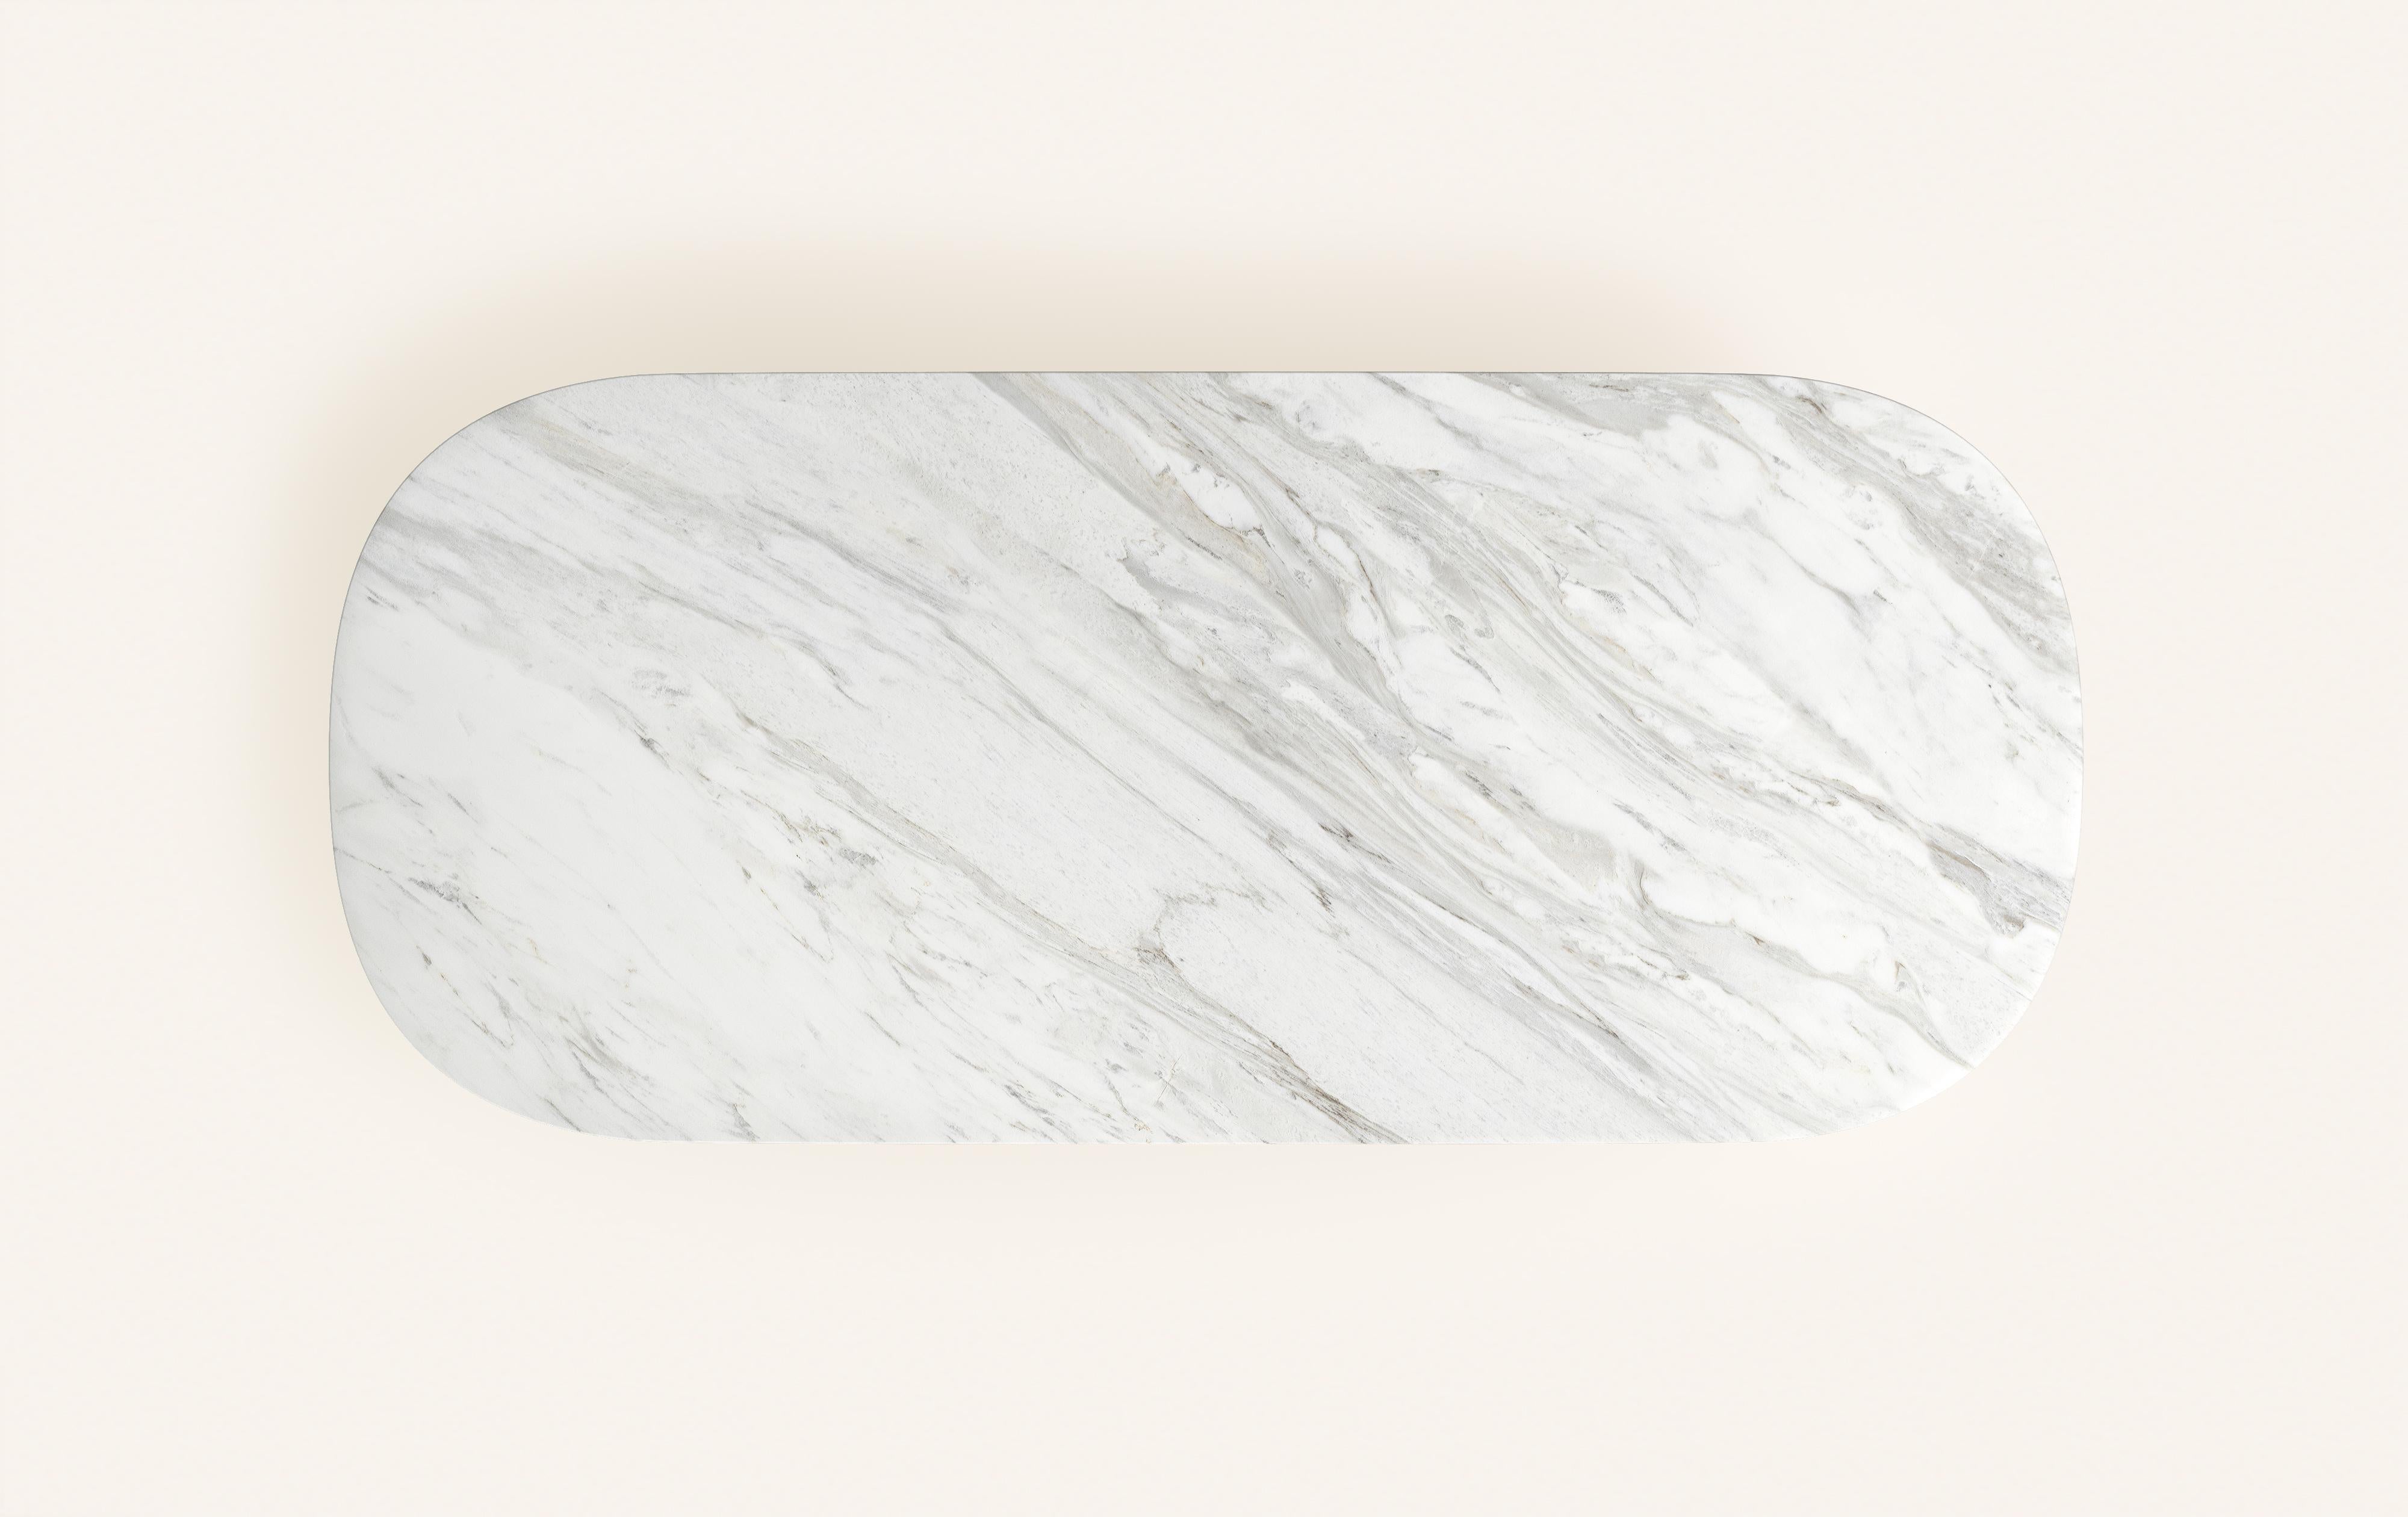 FORM(LA) Cono Oval Dining Table 108”L x 48”W x 30”H Volakas White Marble In New Condition For Sale In Los Angeles, CA